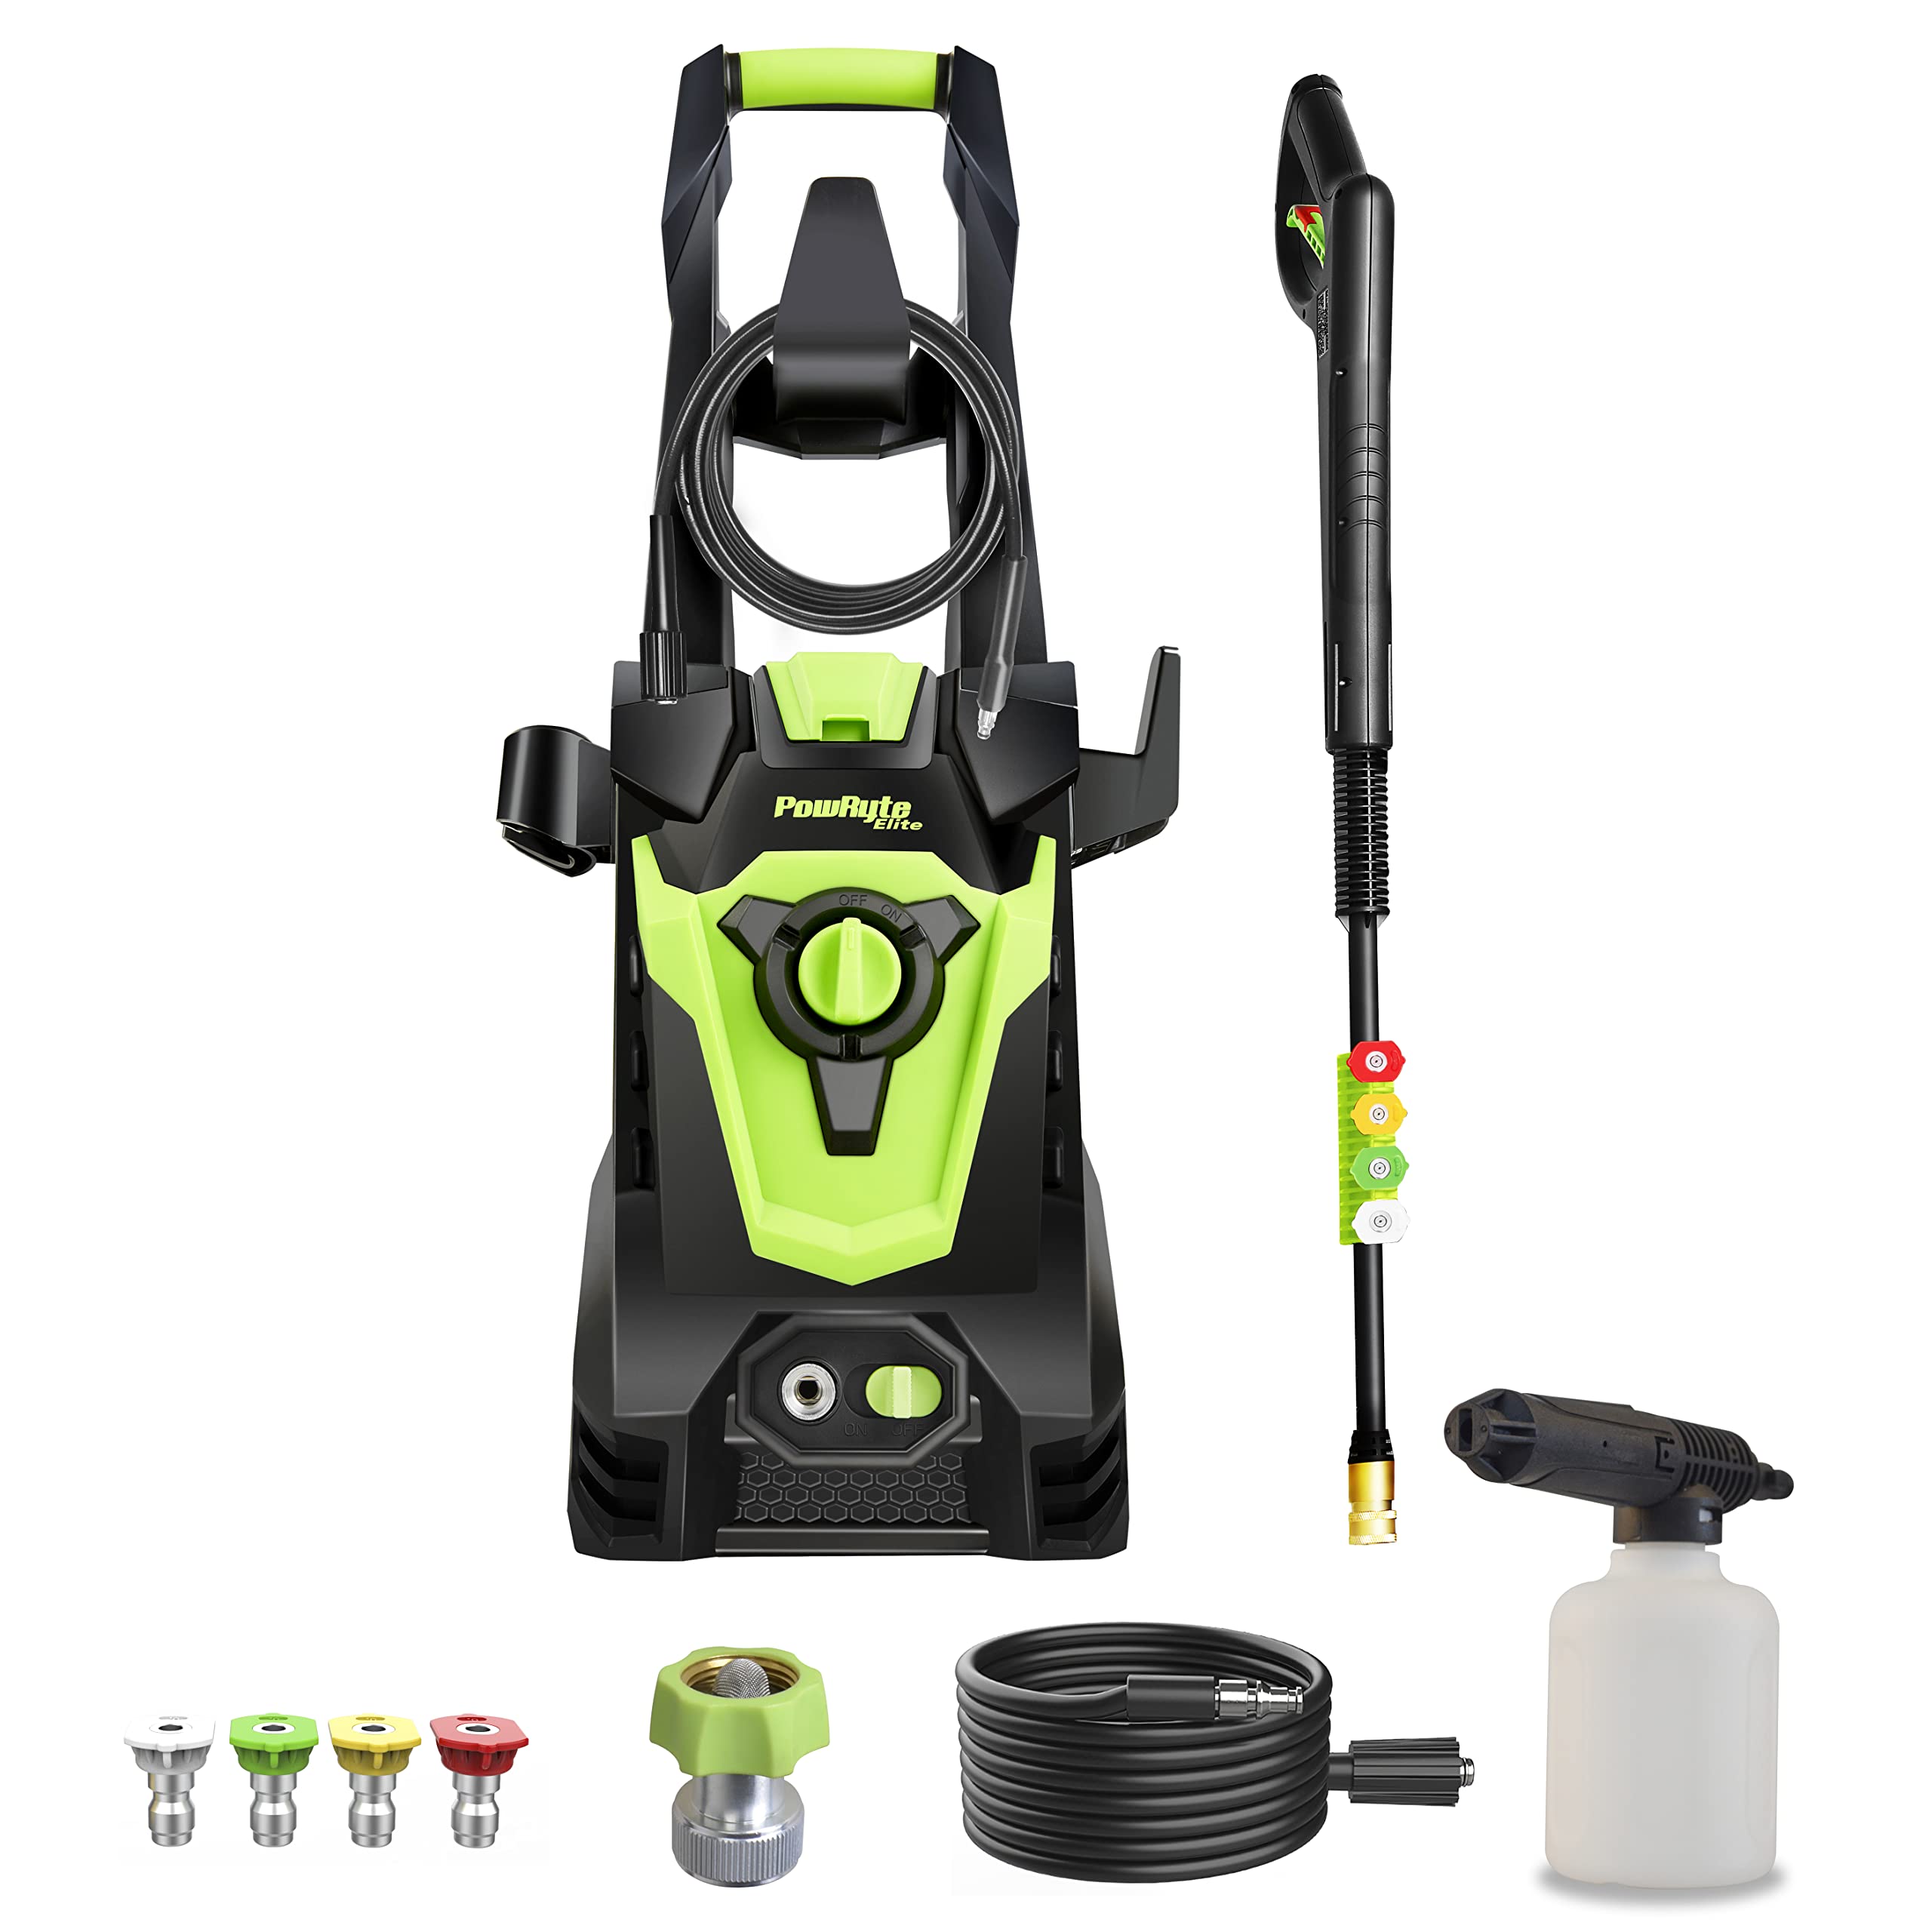 PowRyte Electric Pressure Washer, Foam cannon, 4 Different Pressure Tips, Power Washer, 3800 PSI 24 gPM